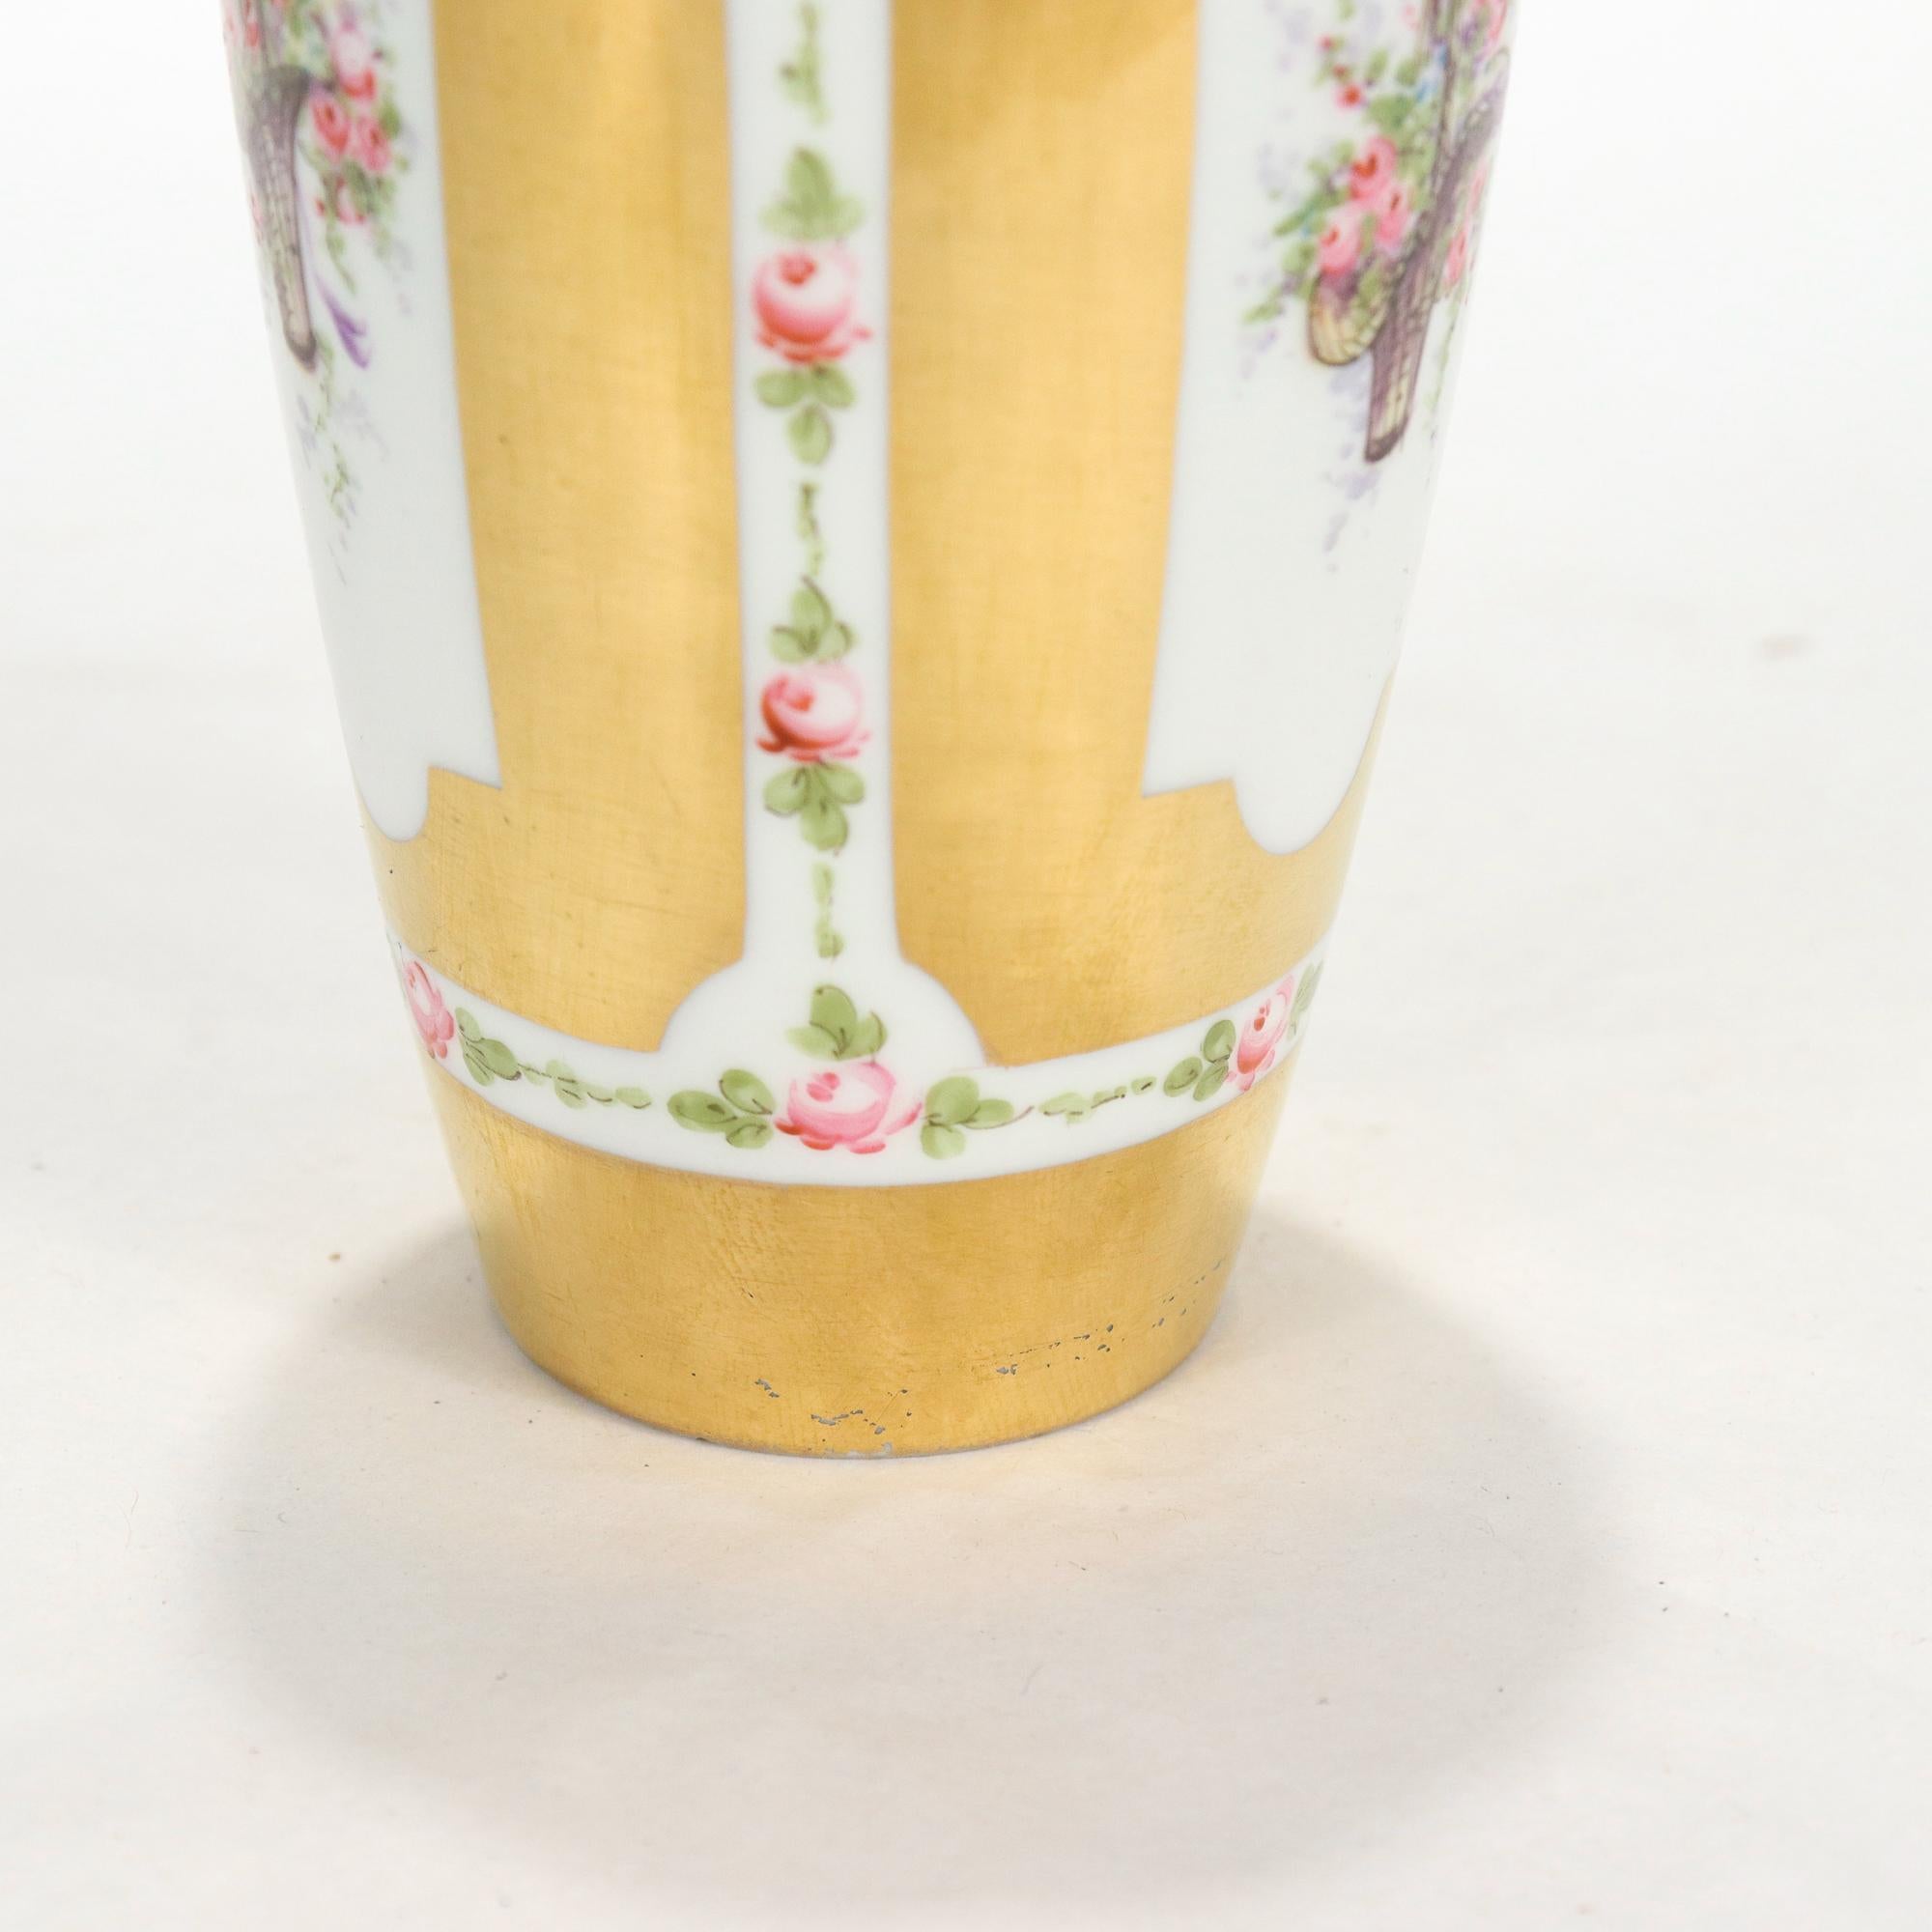 Old Sevres Type Gilt Porcelain Vase with Hand Painted Flower Baskets & Ribbons For Sale 3